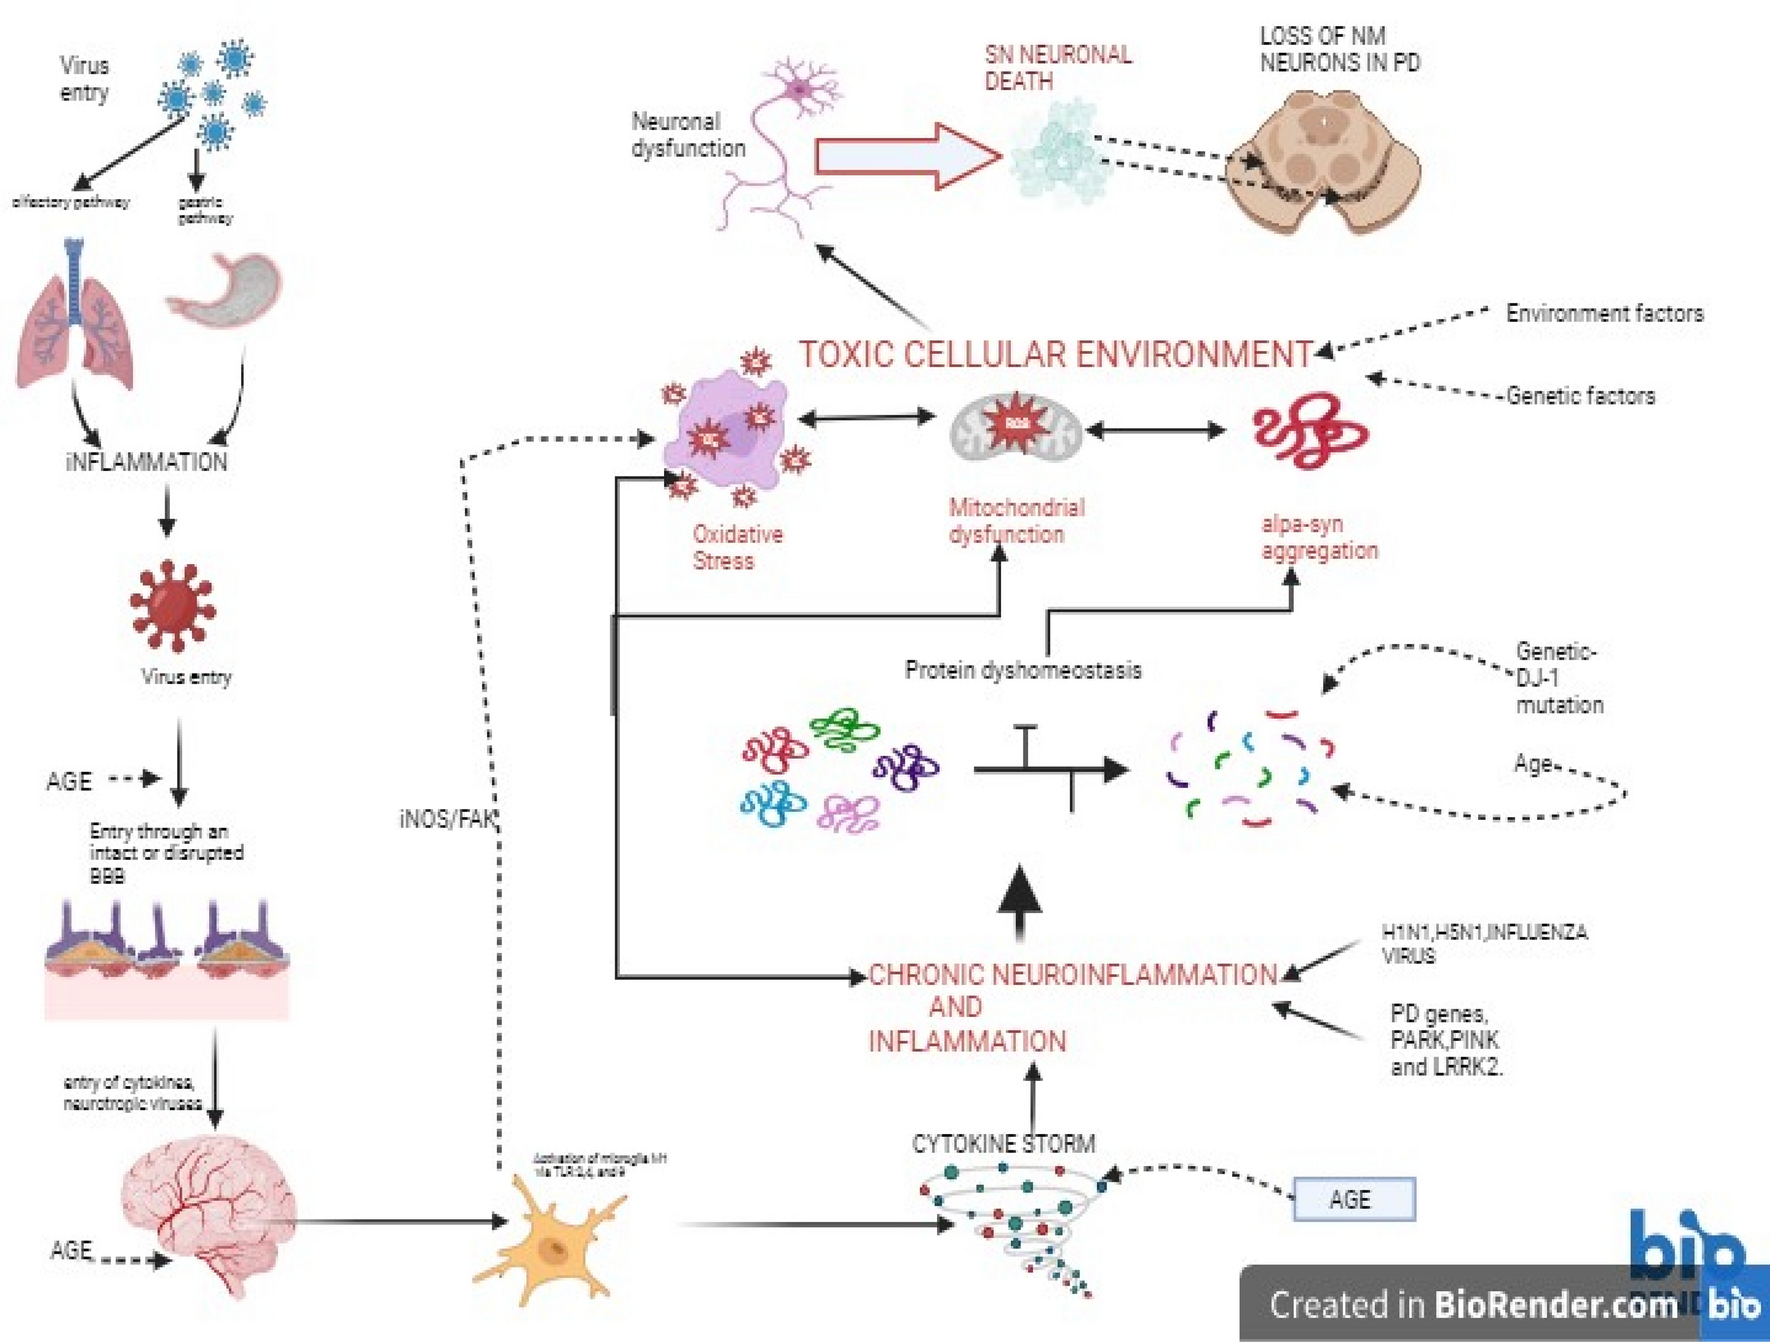 Virus-induced brain pathology and the neuroinflammation-inflammation continuum: the neurochemists view